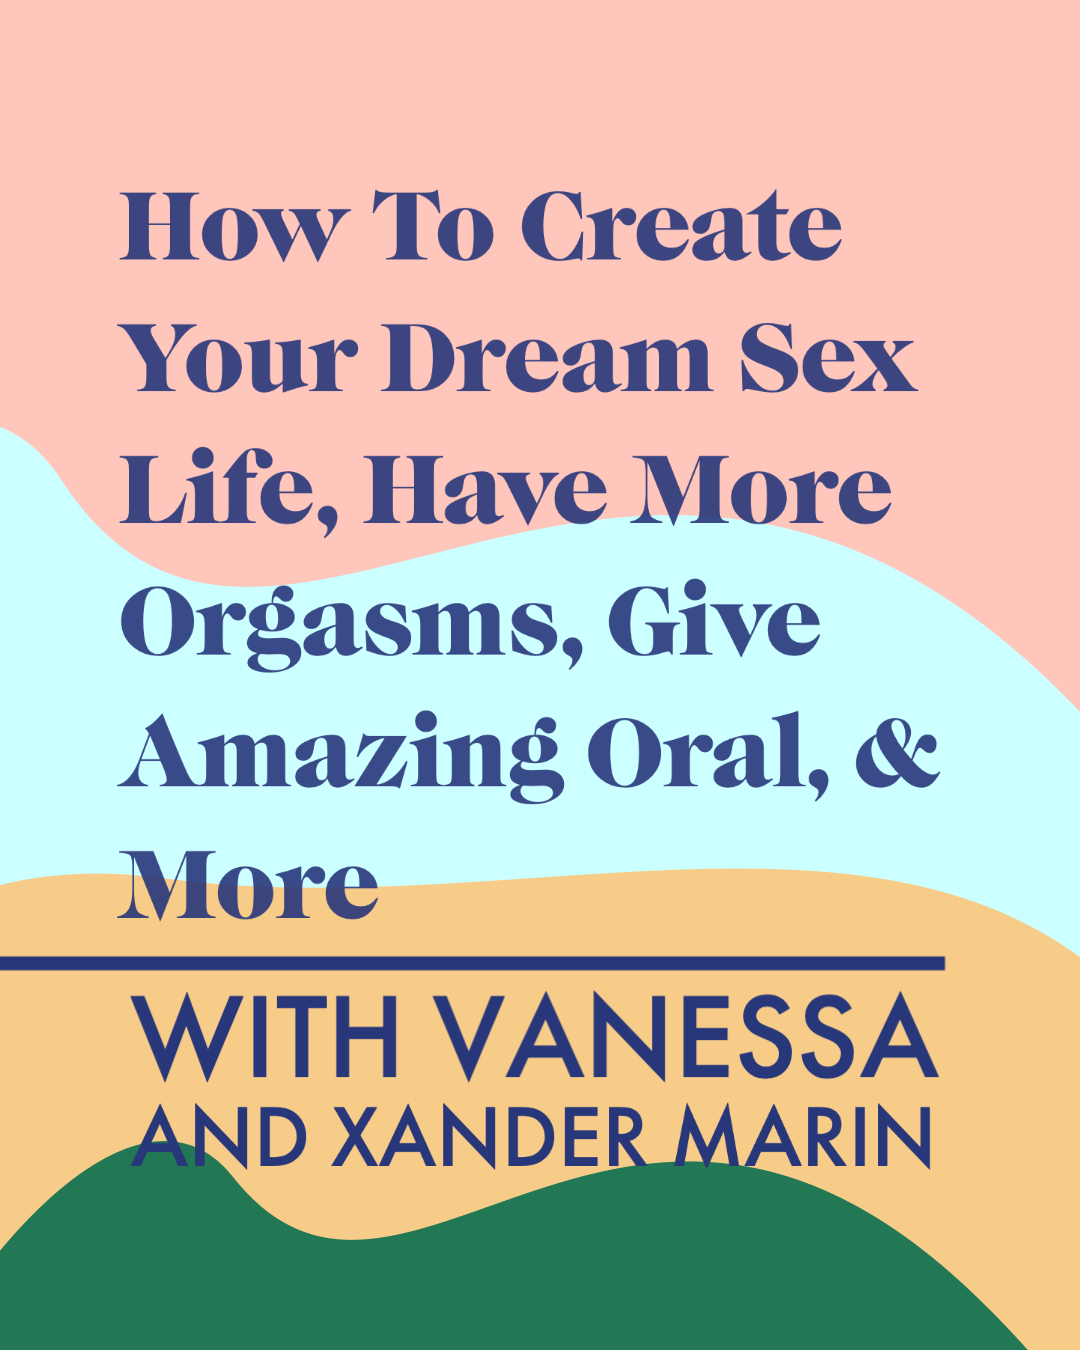 Vanessa And Xander Marin On The Healthier Together Podcast 3895